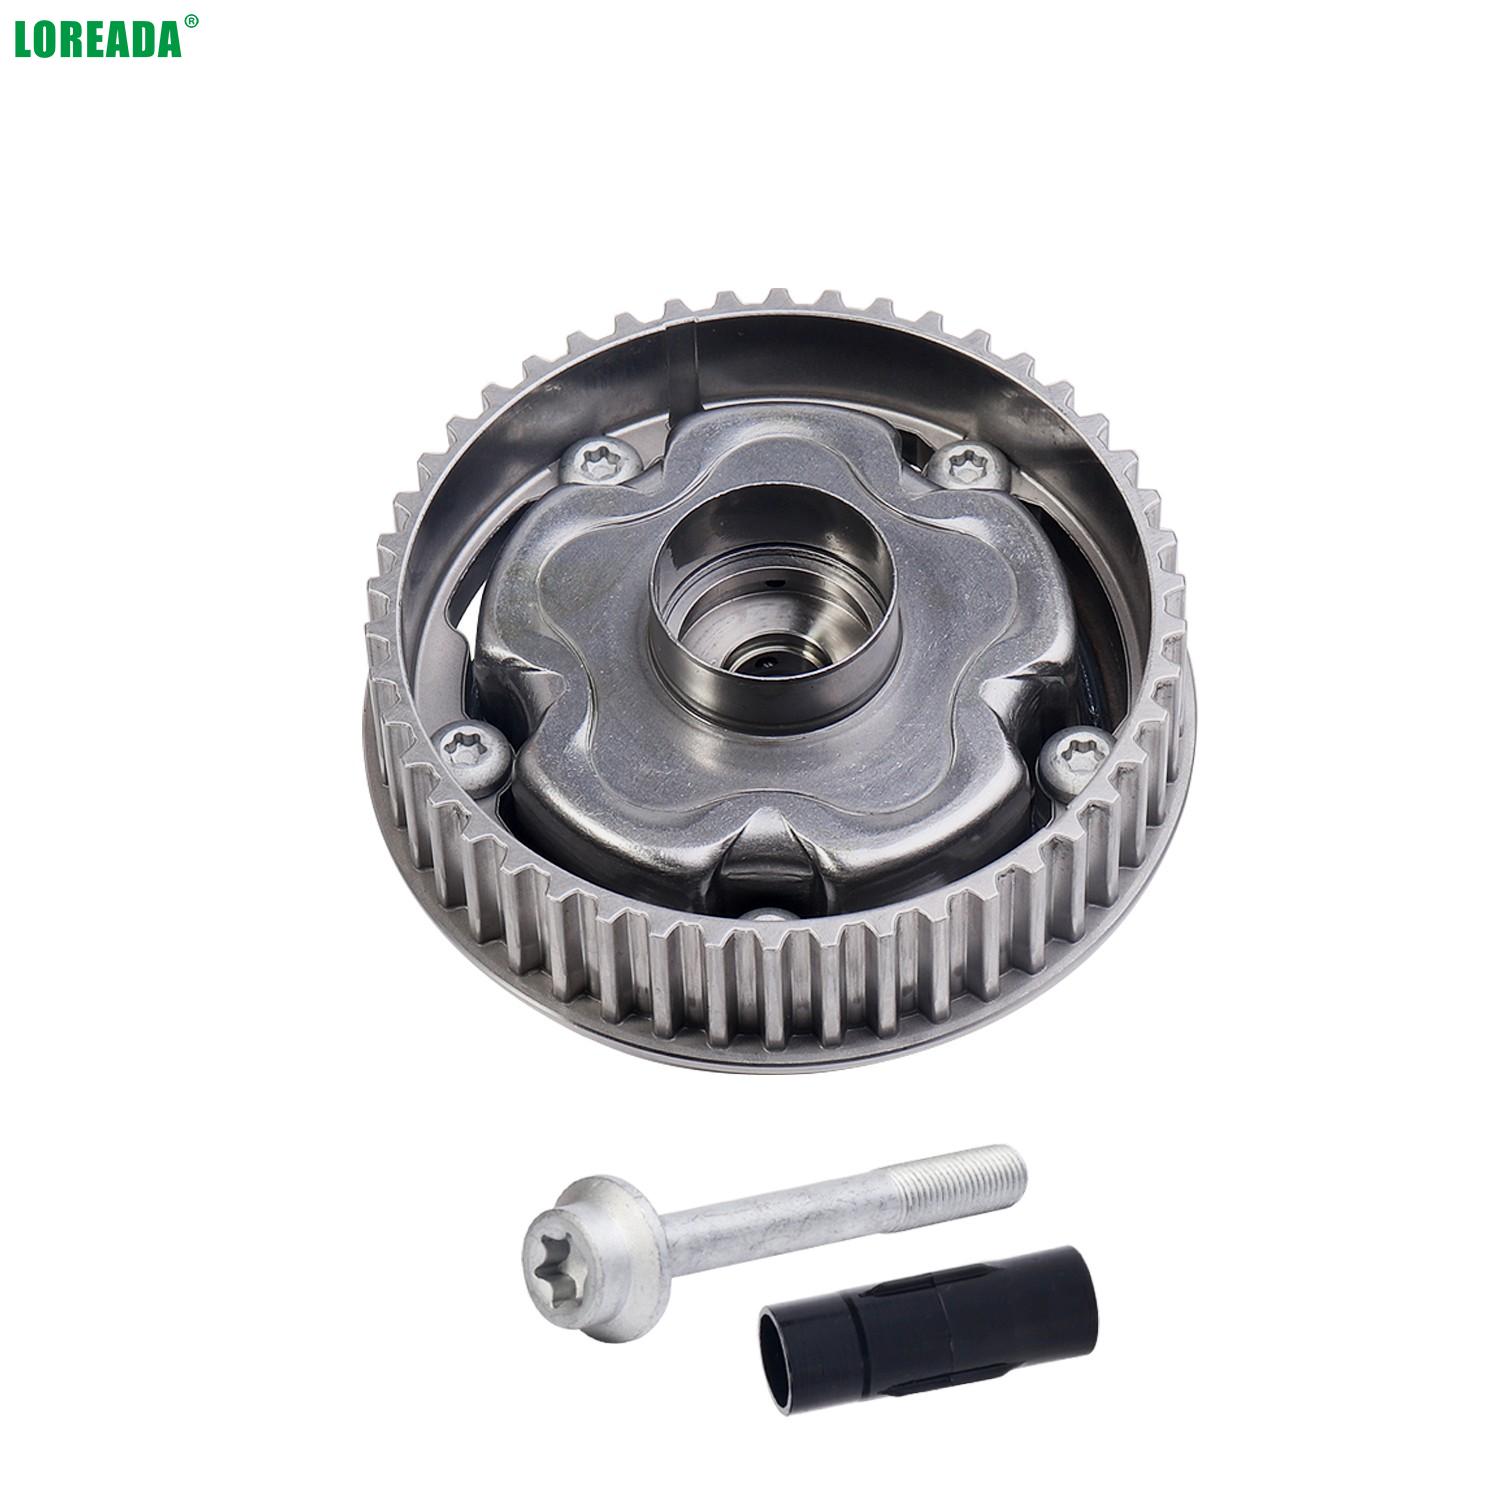  LOREADA Intake Exhaust Engine Timing Camshaft Cam Gear OEM For Chevrolet- Aveo Cruze Sonic Opel Vauxhall Astra 55567048 55568386 55567049